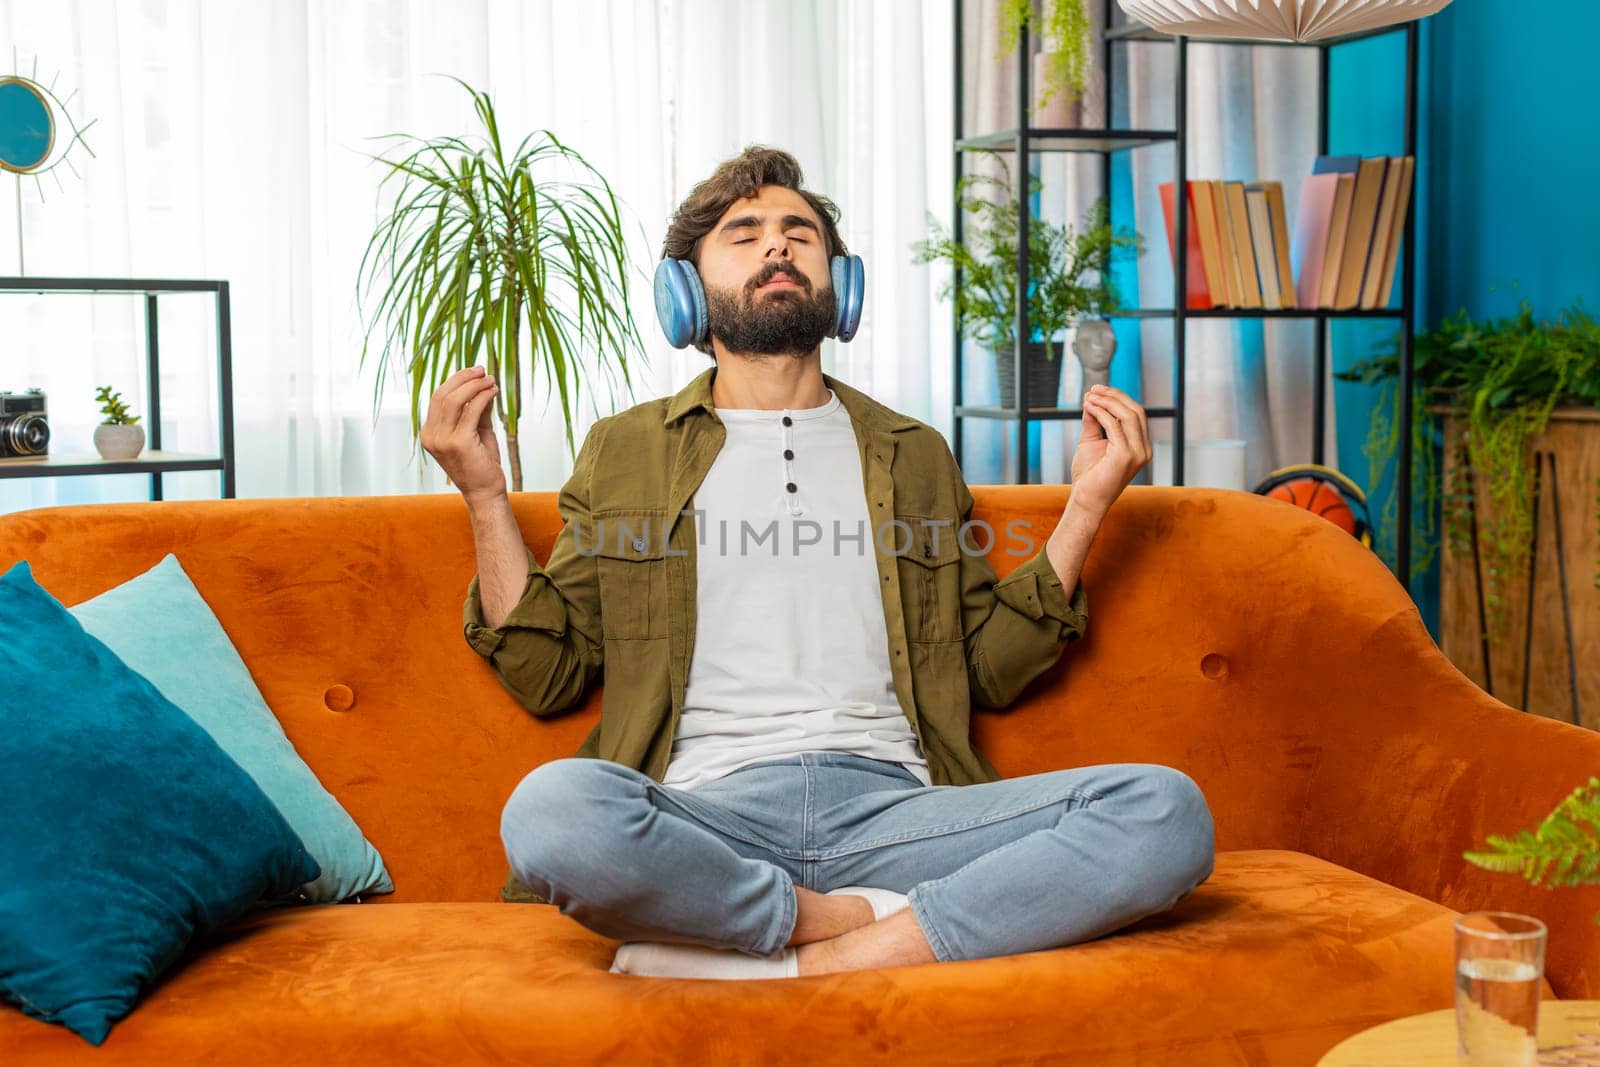 Keep calm down, relax. Middle eastern arabian man listening music breathes deeply, eyes closed meditating with concentrated thoughts, peaceful mind. Young bearded guy sits at home in room on couch